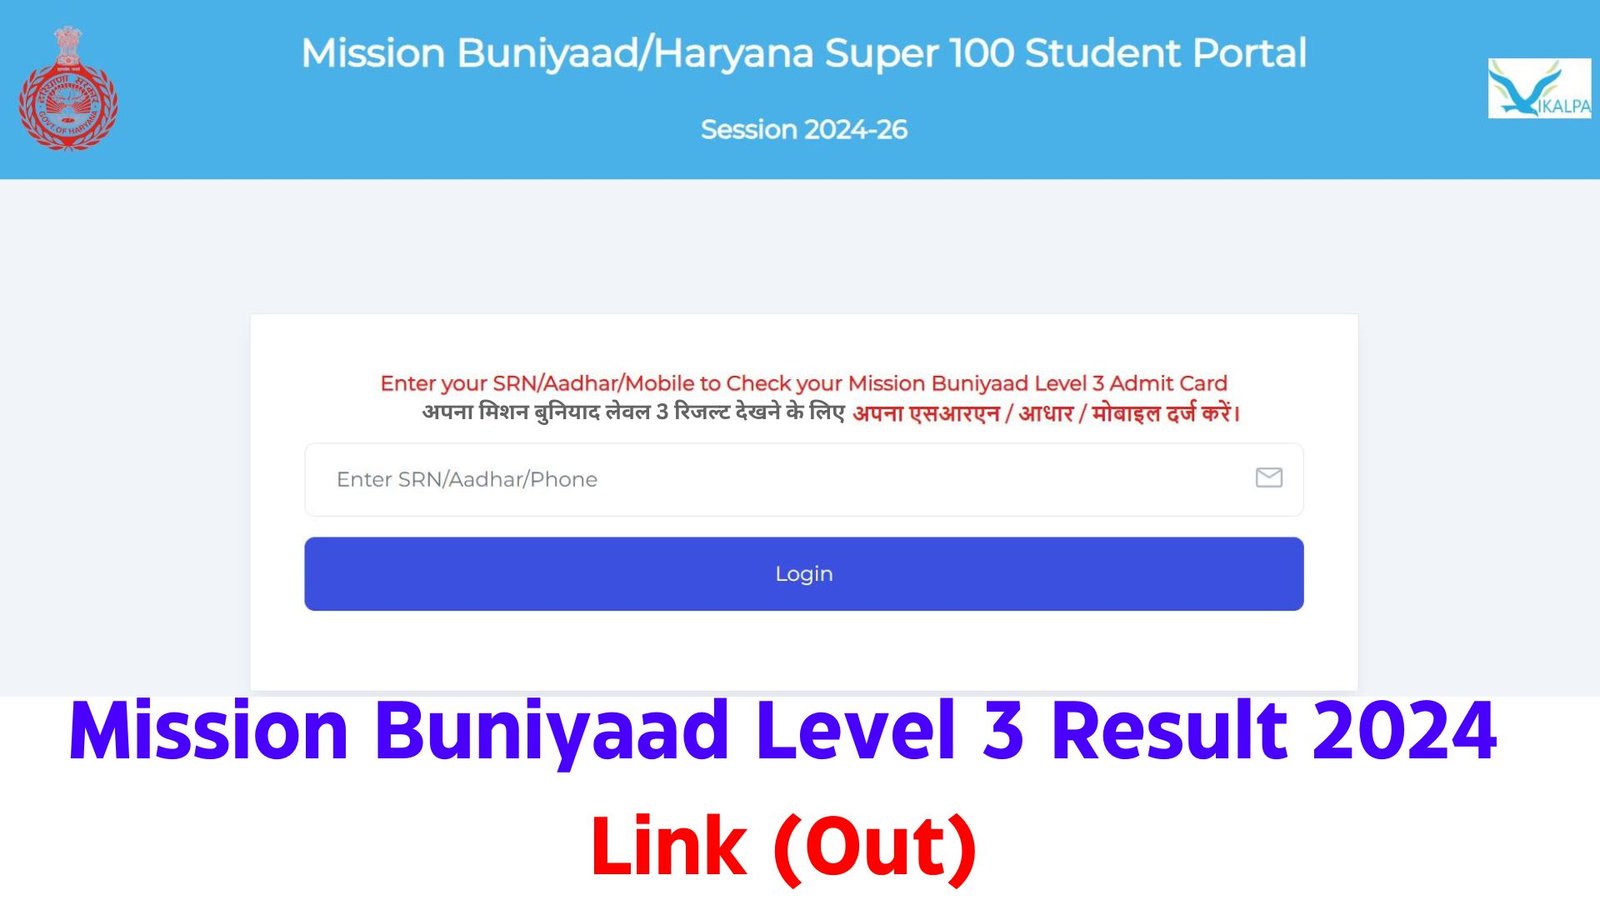 Mission Buniyaad Level 3 Result 2024 Link Out